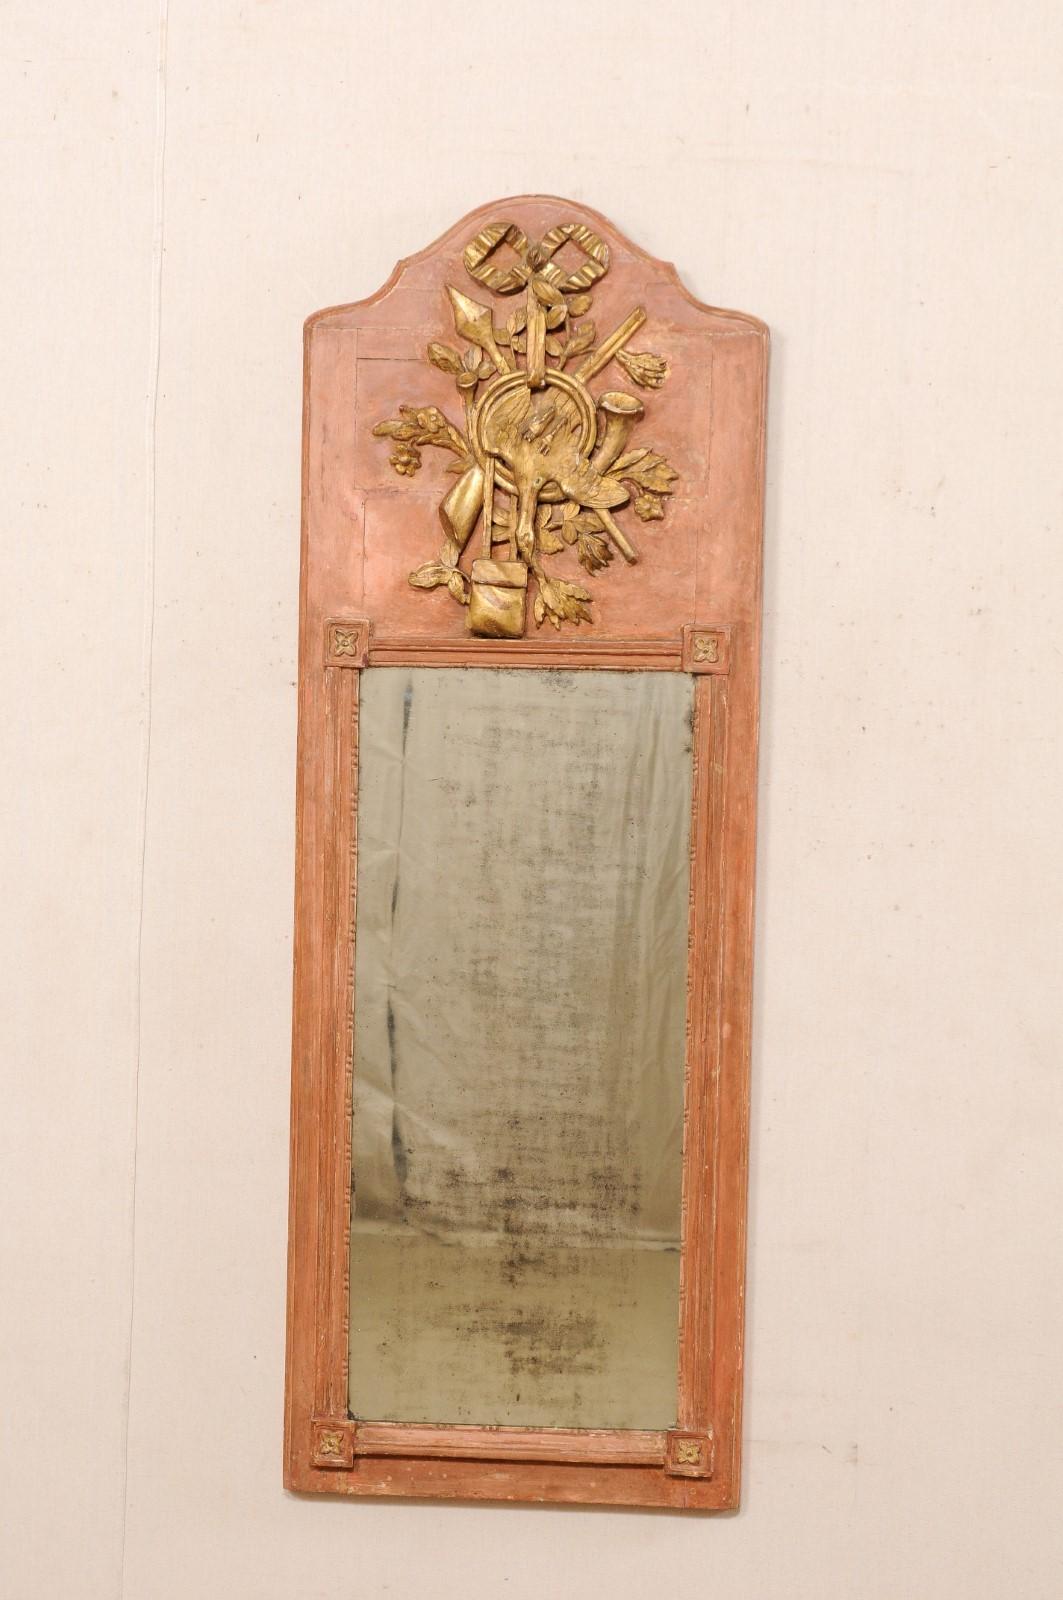 A French carved wood trumeau mirror, with country manor themed carvings, from the 19th century. This antique mirror from France is rectangular-shaped, set in vertical fashion, and features an arched crest top, with raised carvings adorning the upper